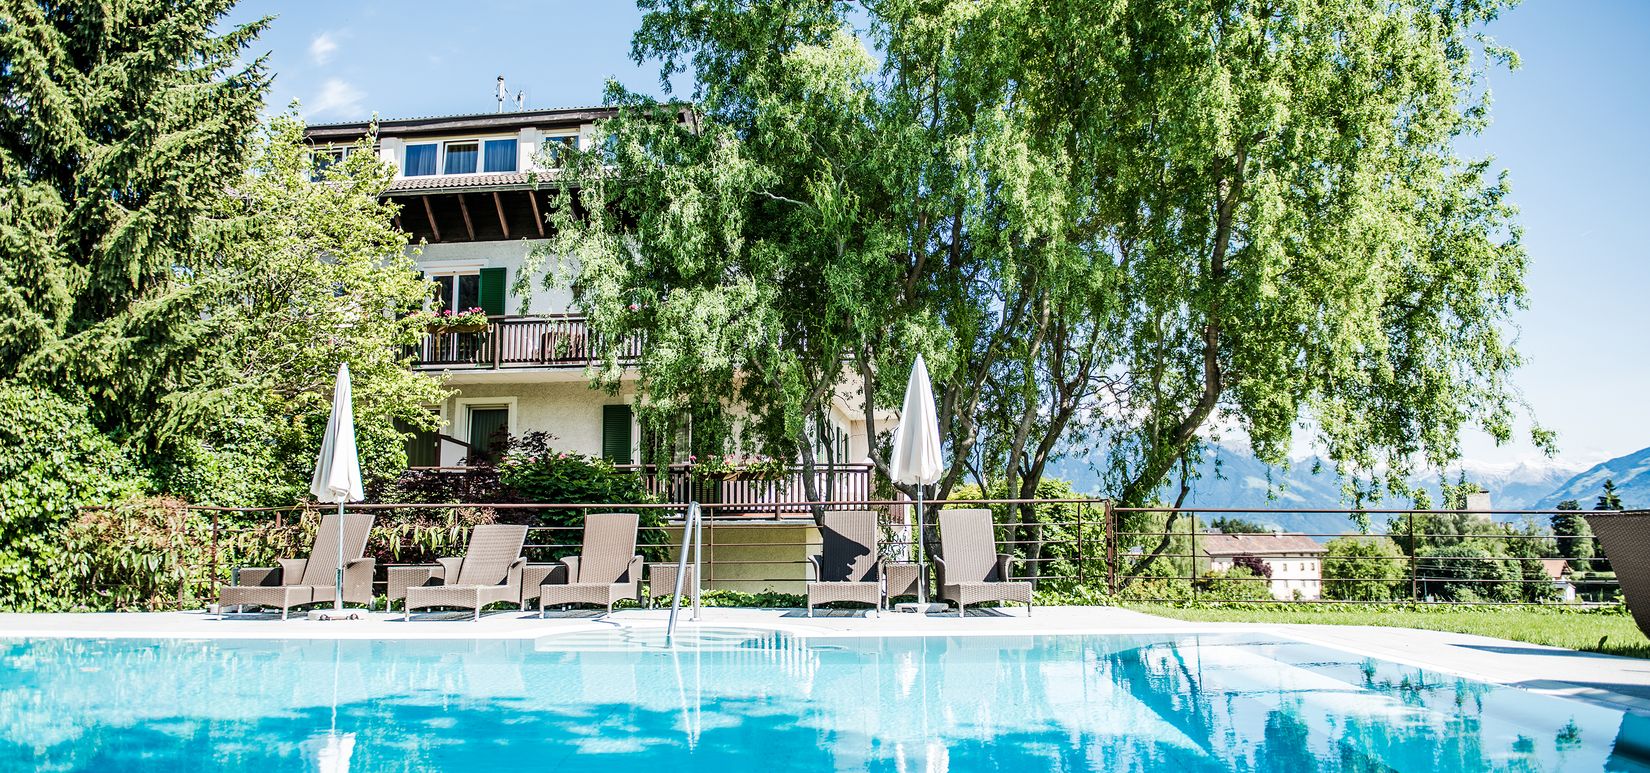 Accommodation Foiana with swimming pool